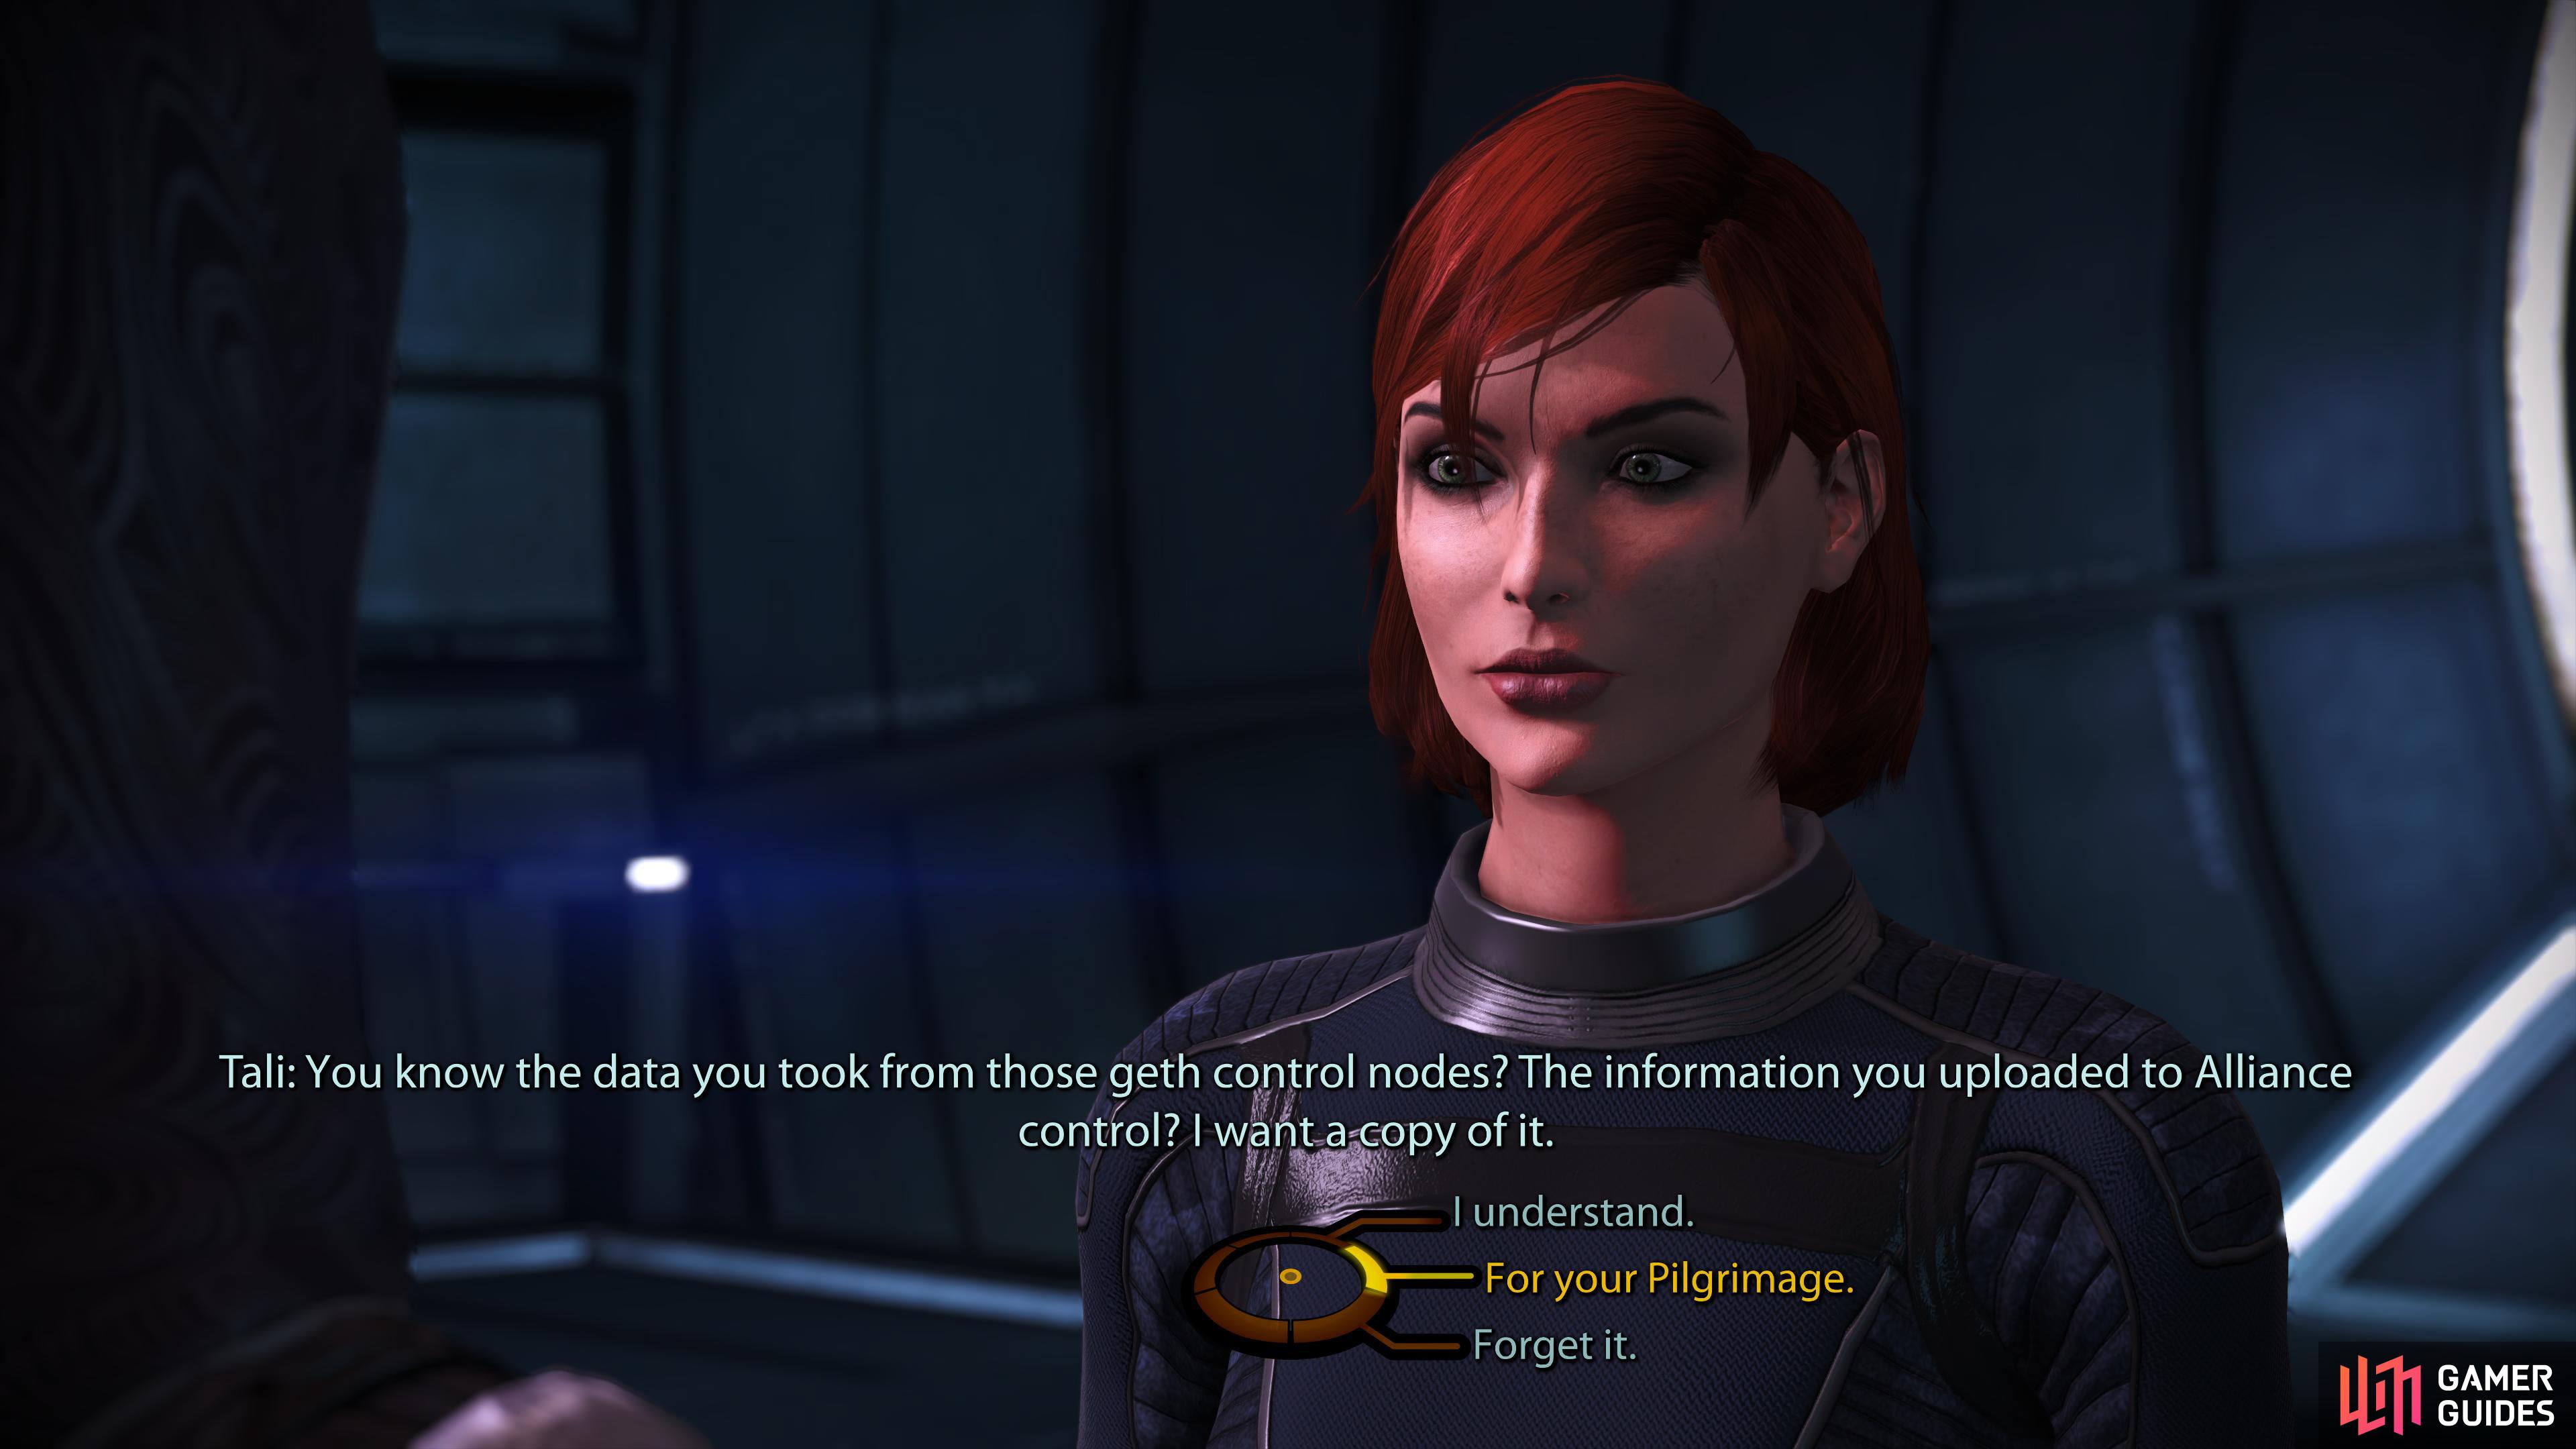 how you respond to her will change how she sees you in Mass Effect 2.